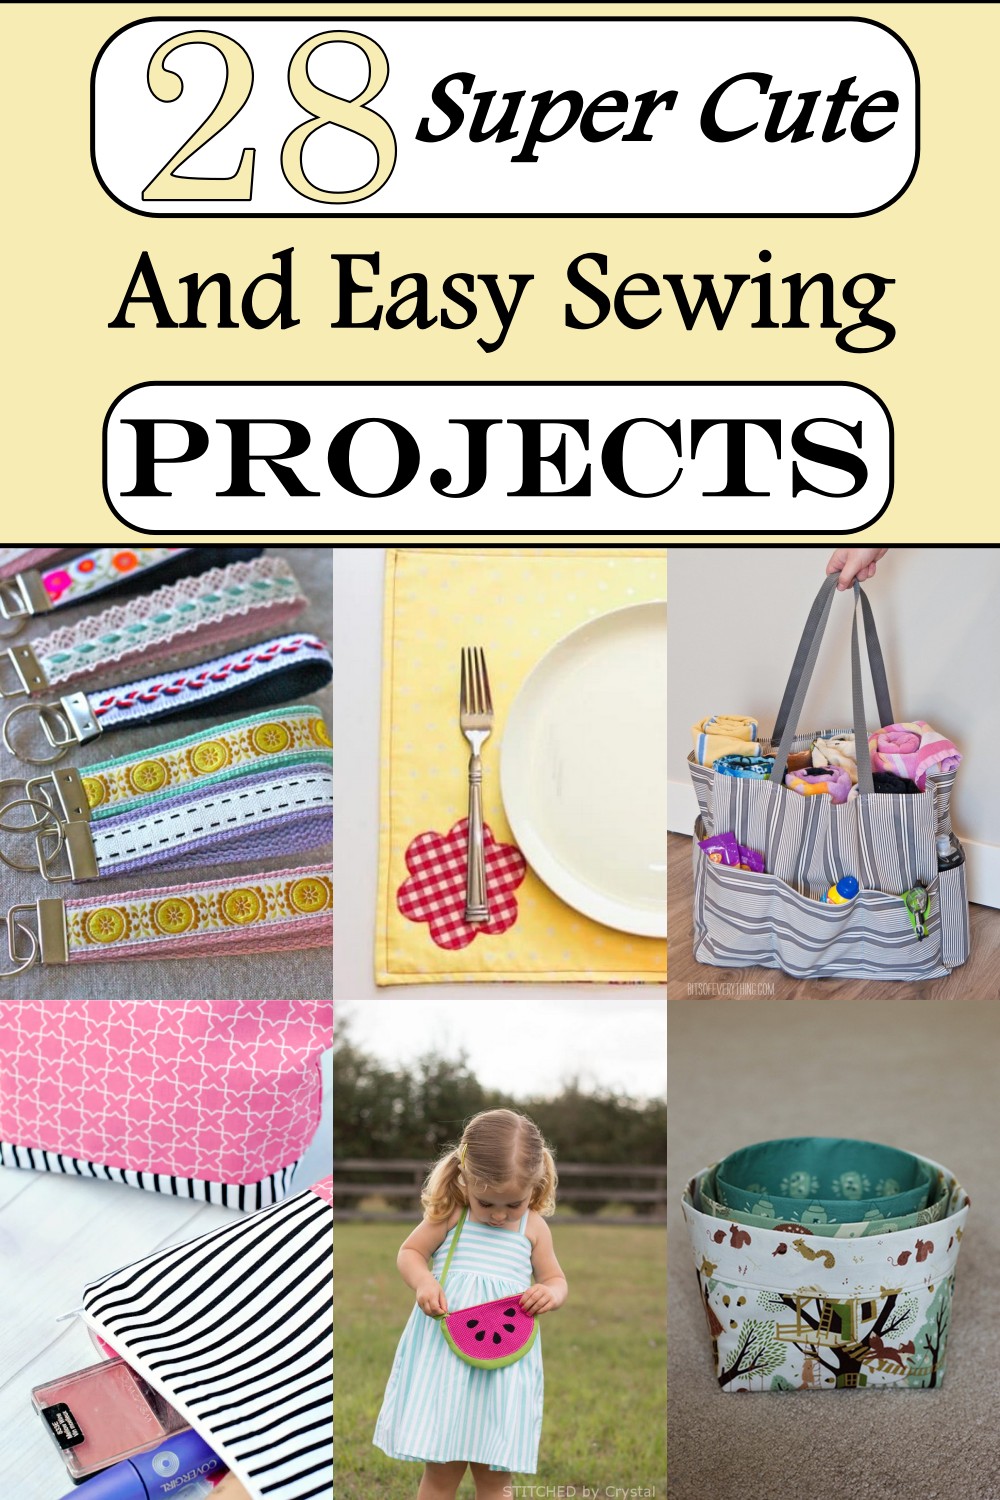 Super Cute And Easy Sewing Projects 1